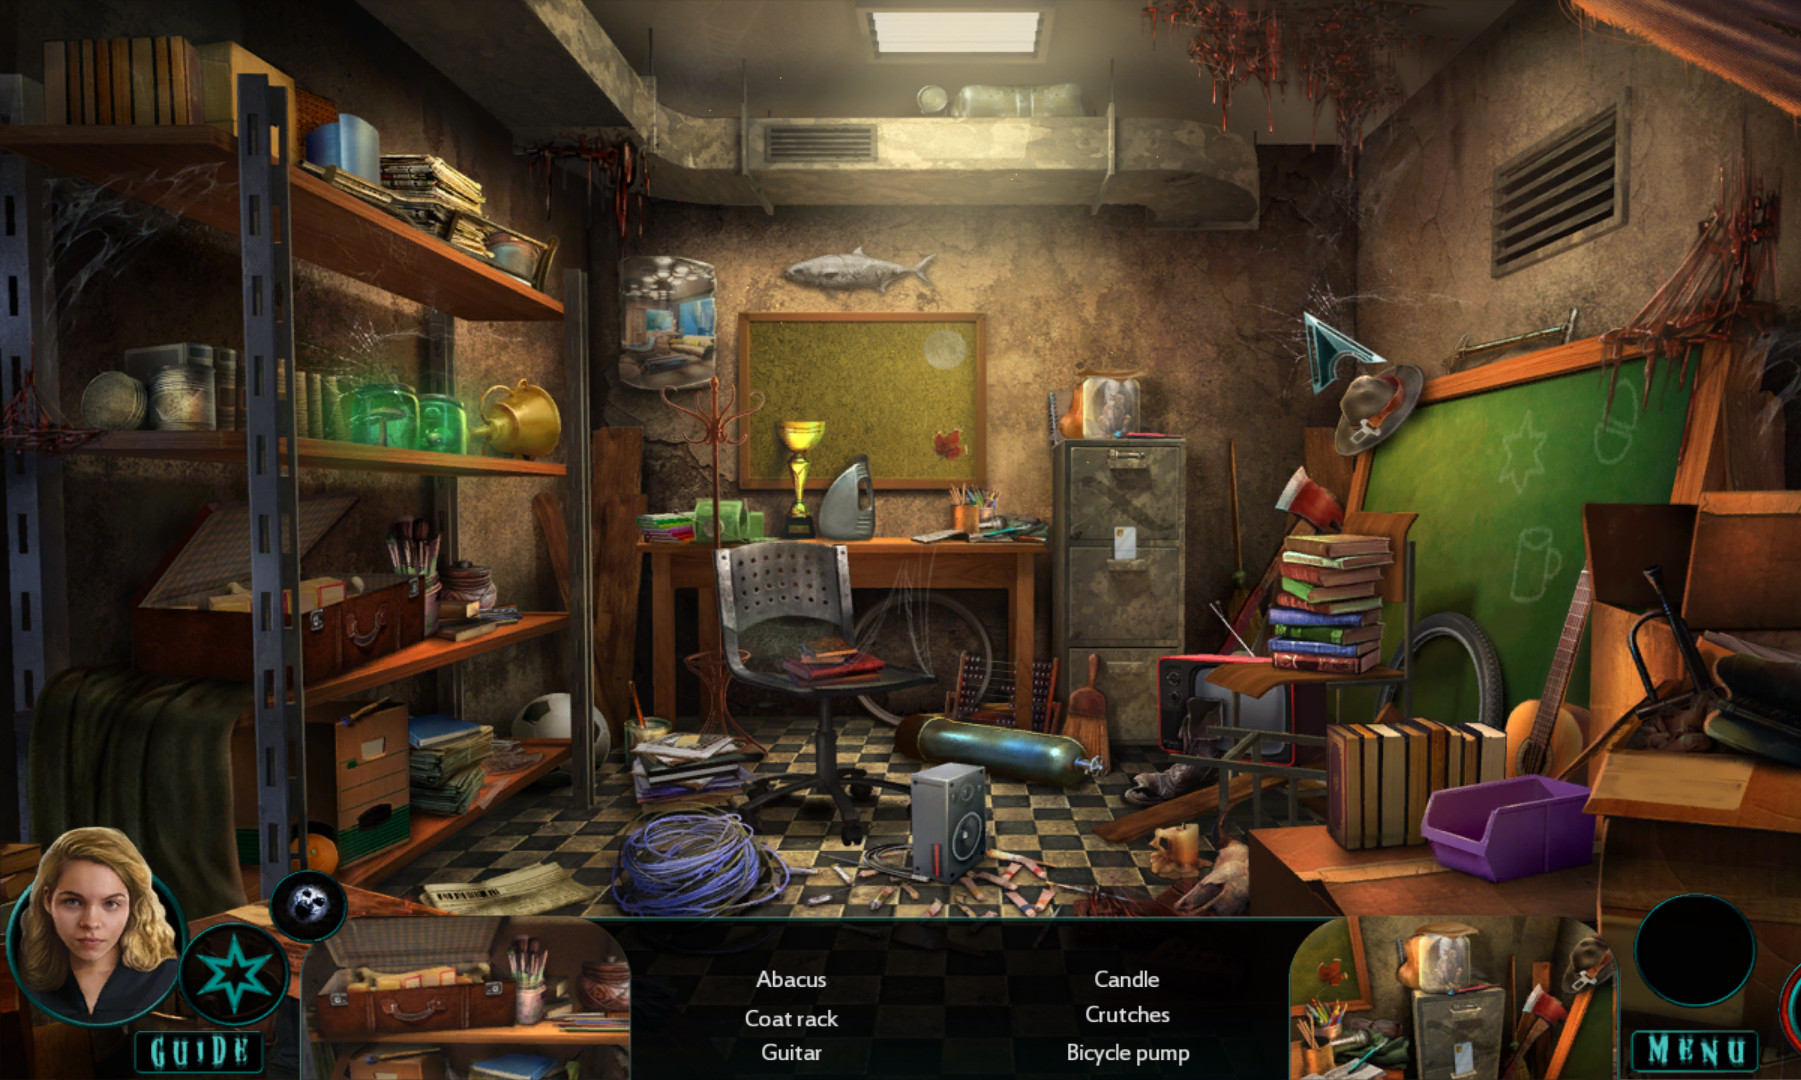 Maze: Sinister Play Collector's Edition Free Download